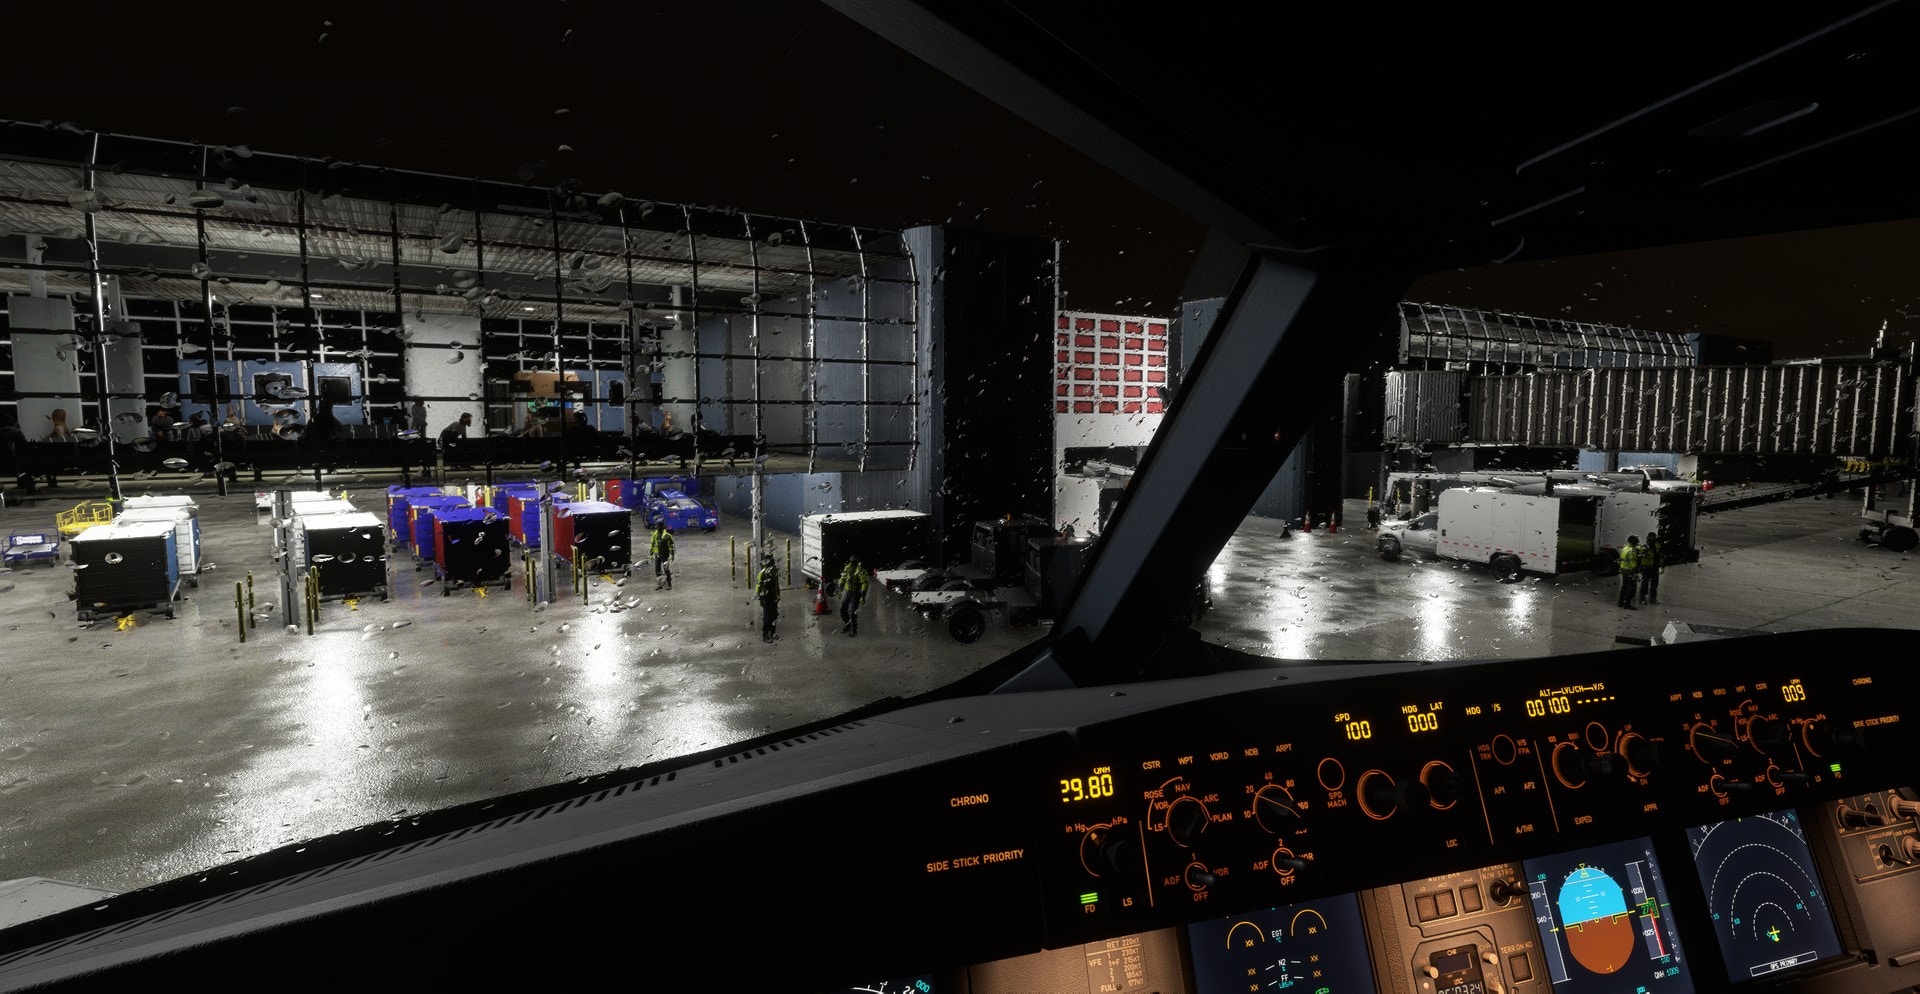 VerticalSim Releases Boise Air Terminal for MSFS